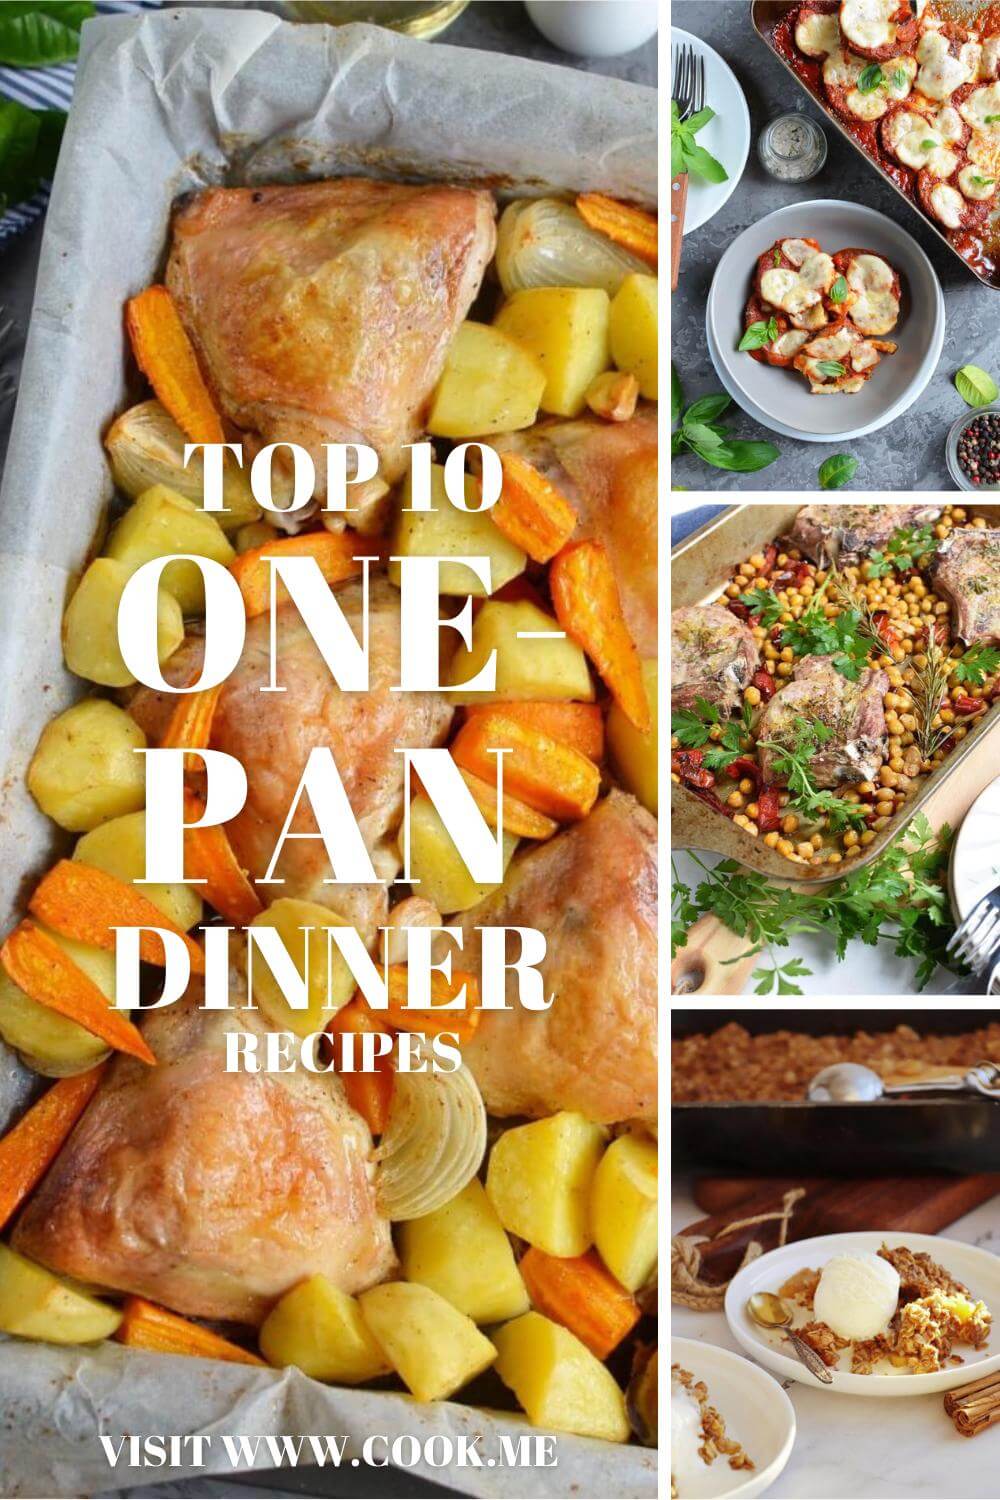 TOP 10 Easy One-Pan Dinner Recipes - Cook.me Recipes